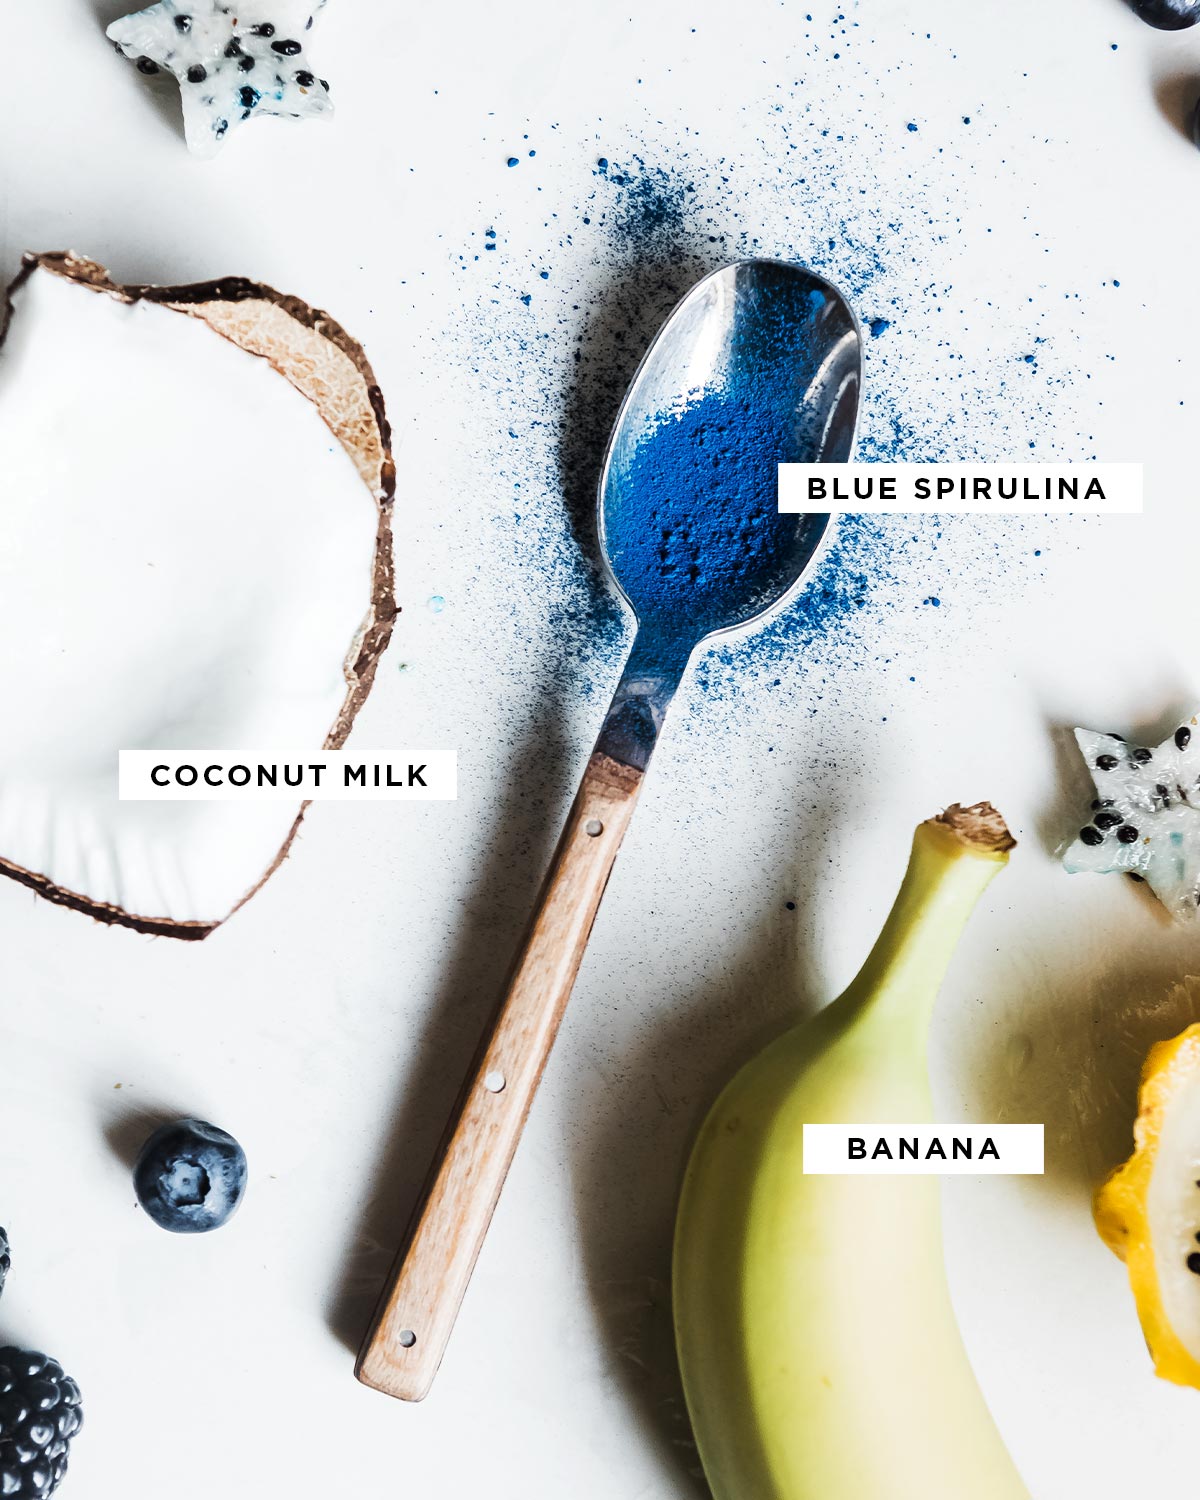 spoon of blue spirulina powder next to a whole banana and cut dragon fruit and coconut.